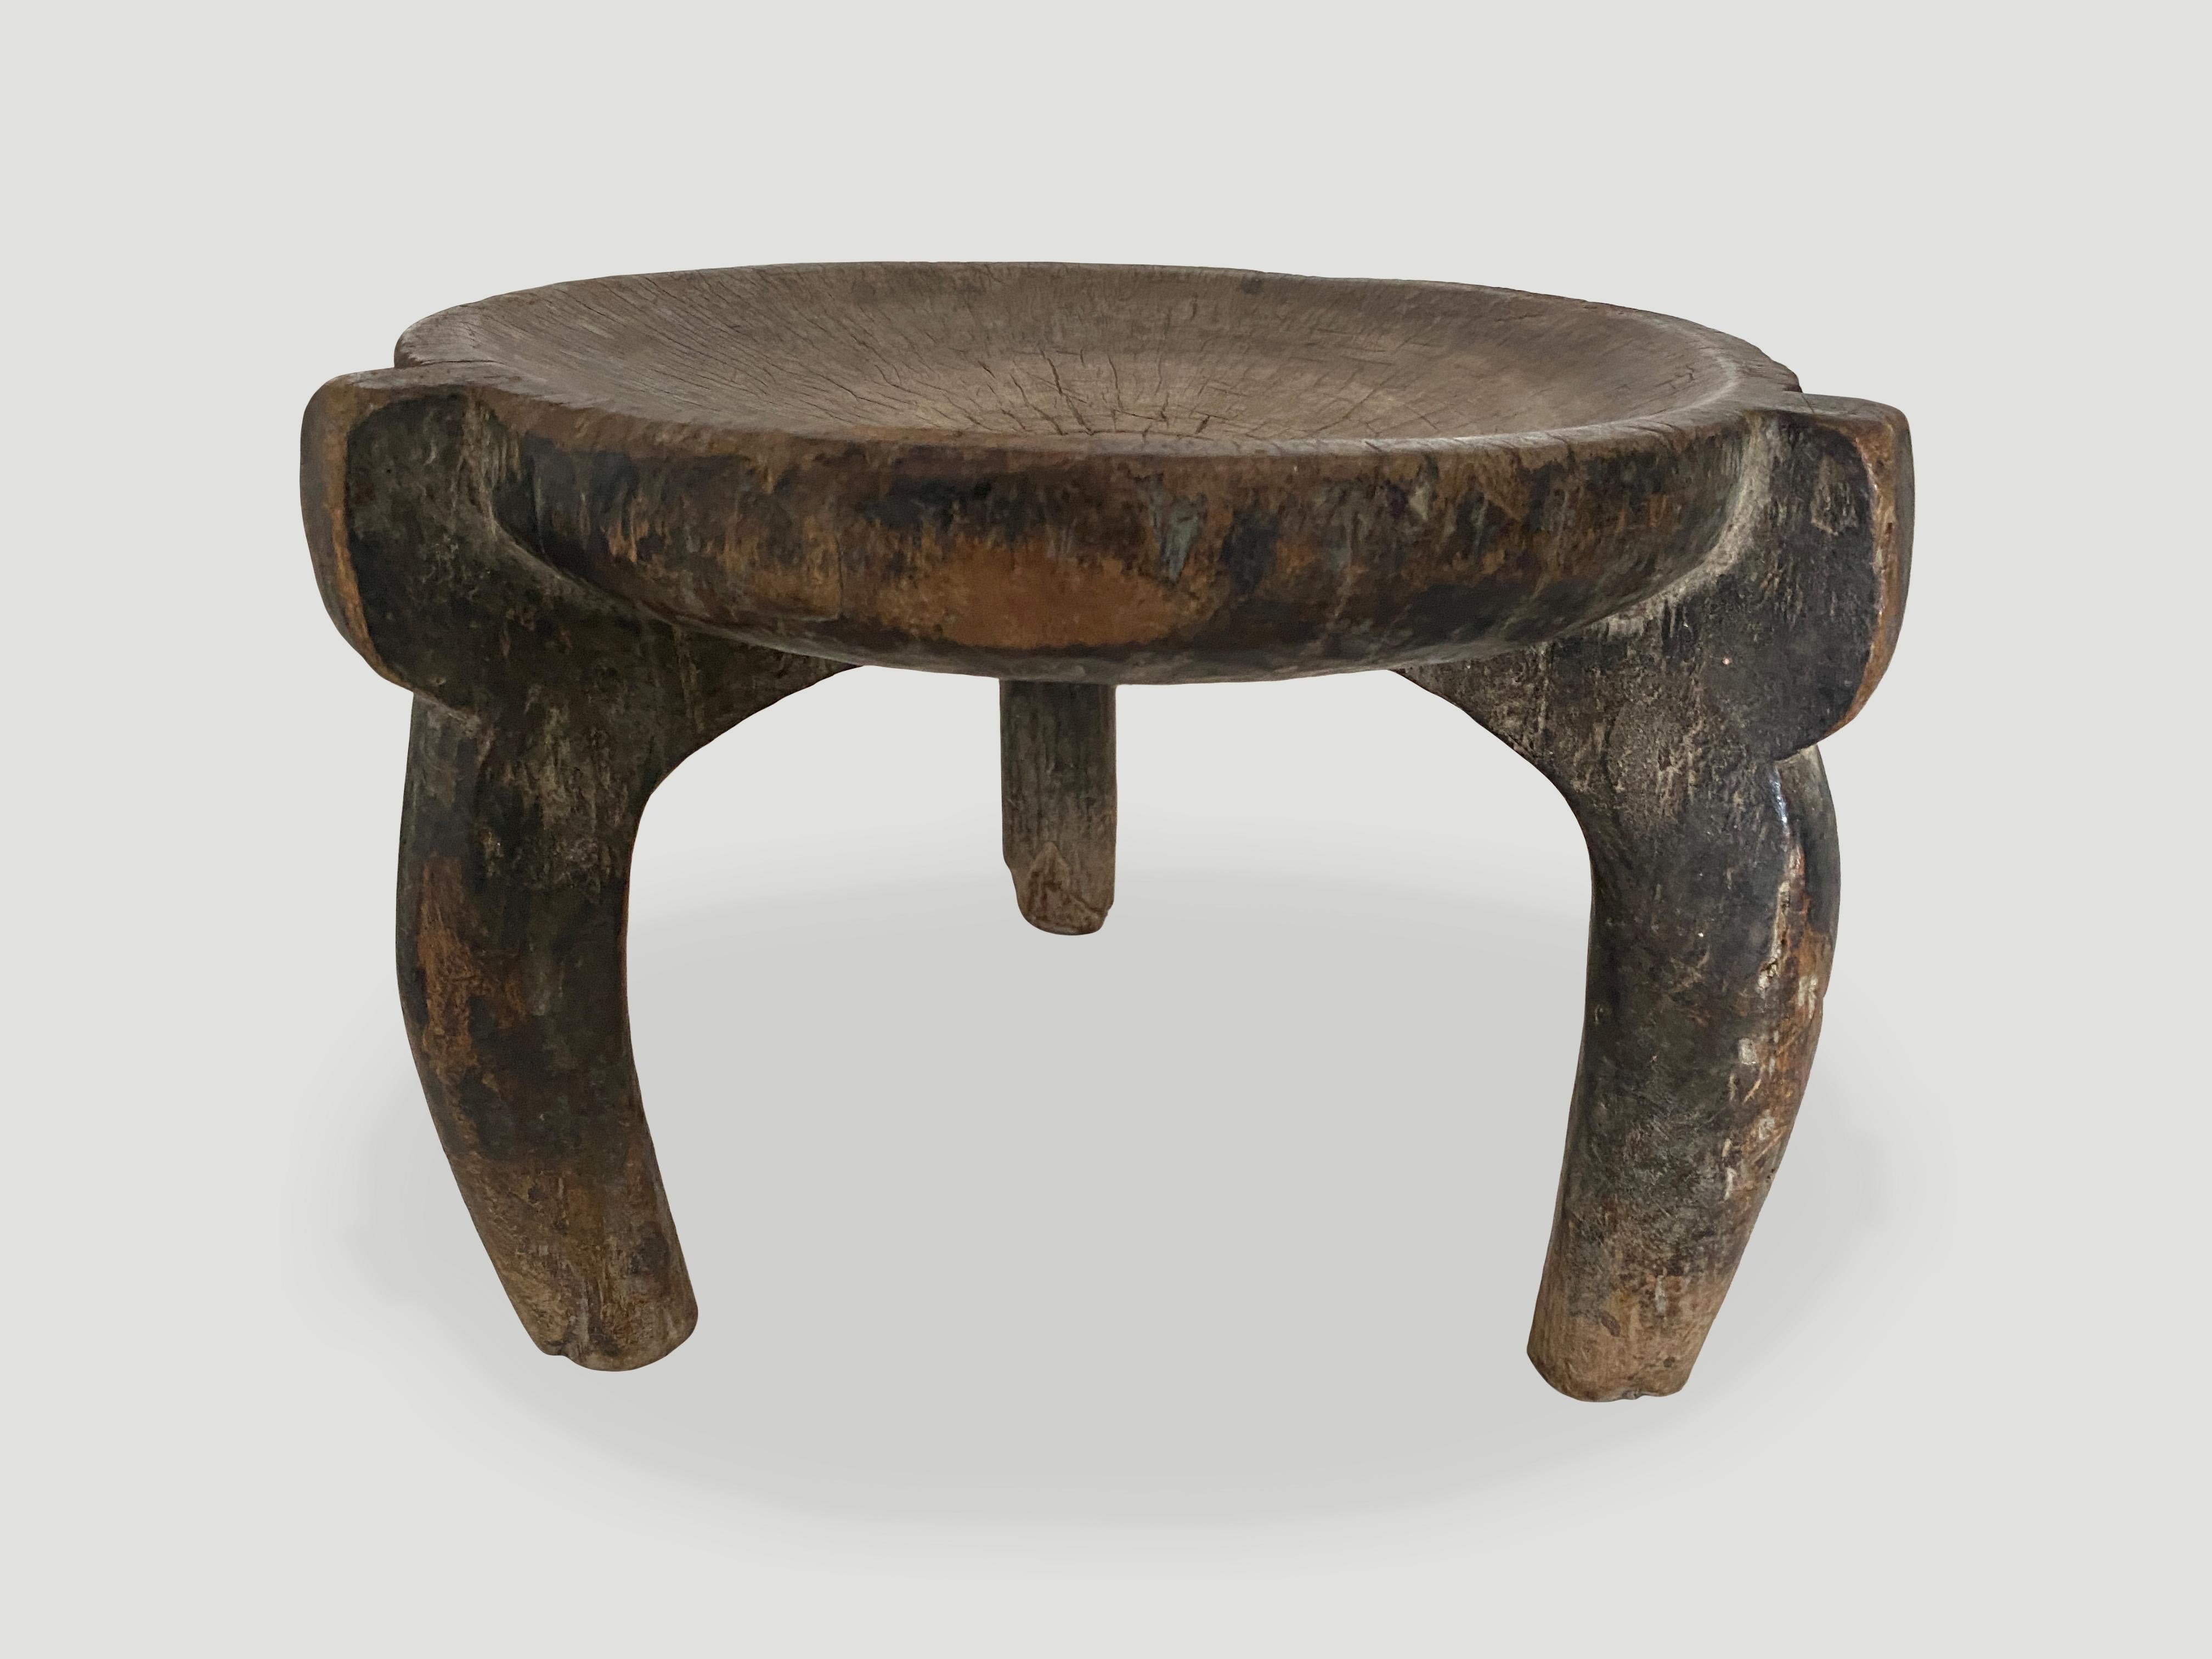 Beautiful hand carved African stool, side table or bowl with lovely patina. The entire piece is hand carved out of a single block of wood. Both sculptural and usable. We only select the best.

This stool, side table or bowl was sourced in the